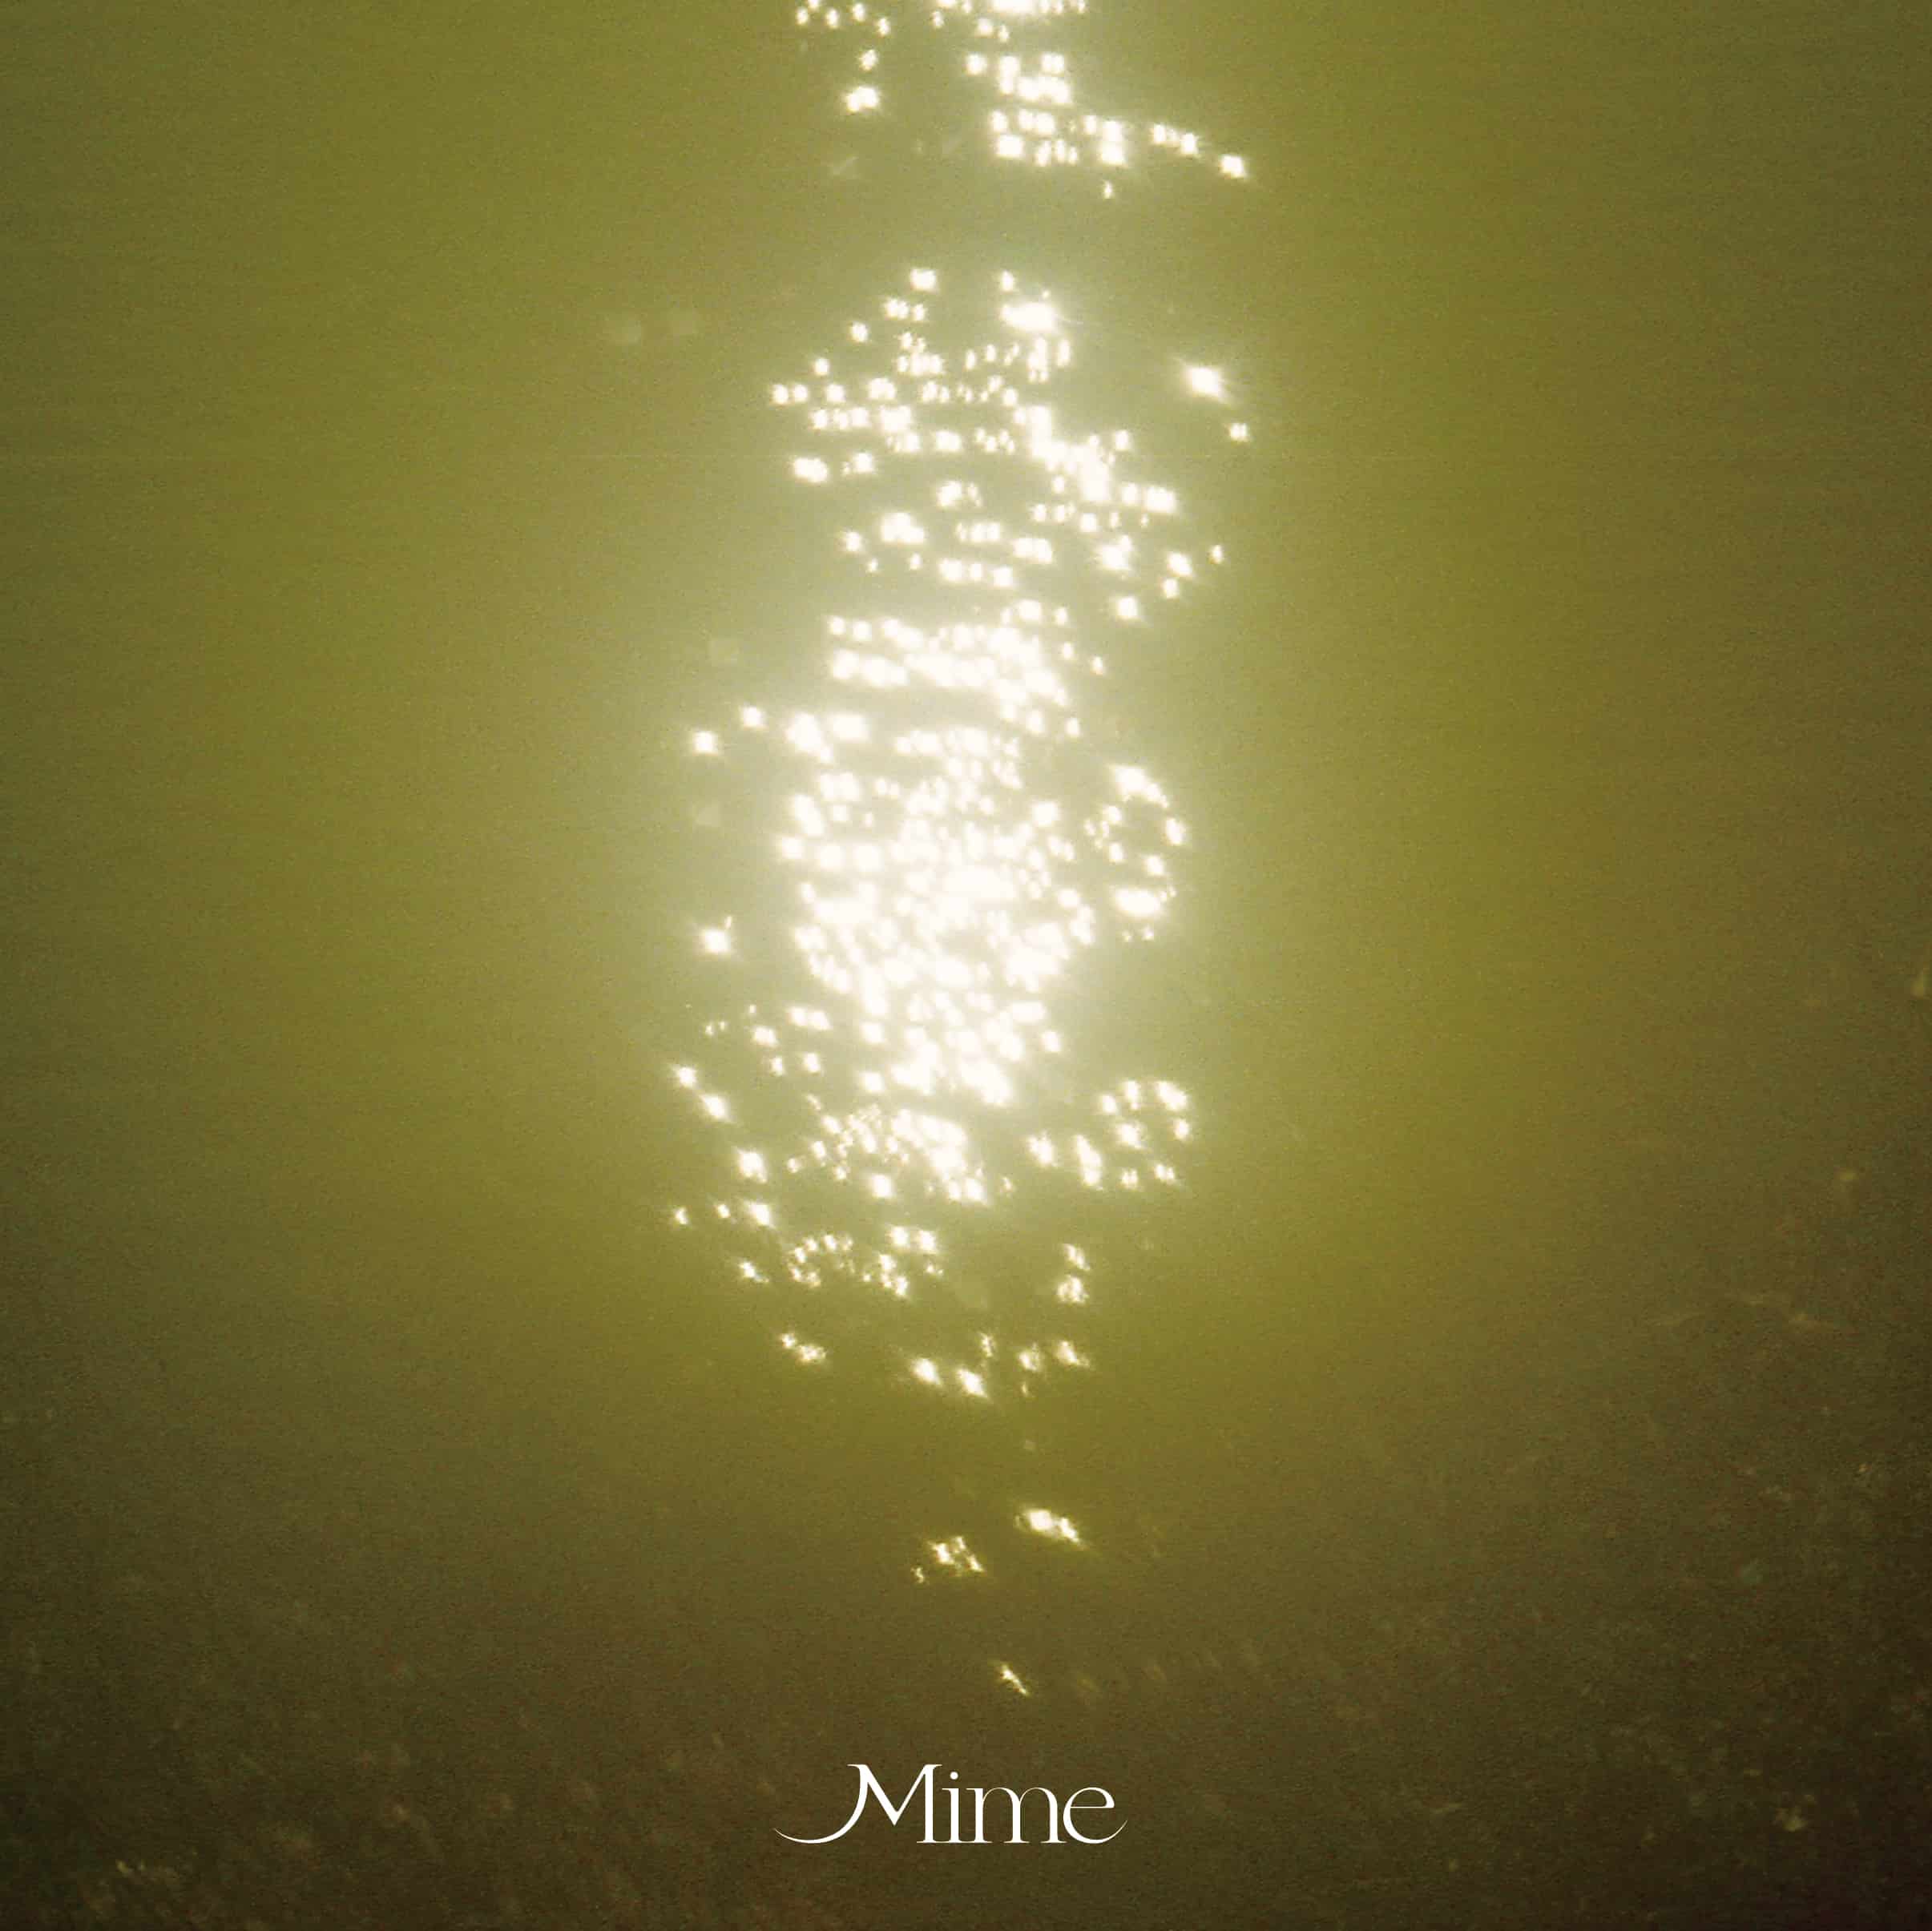 Mime – Caught in Shower / Headlight